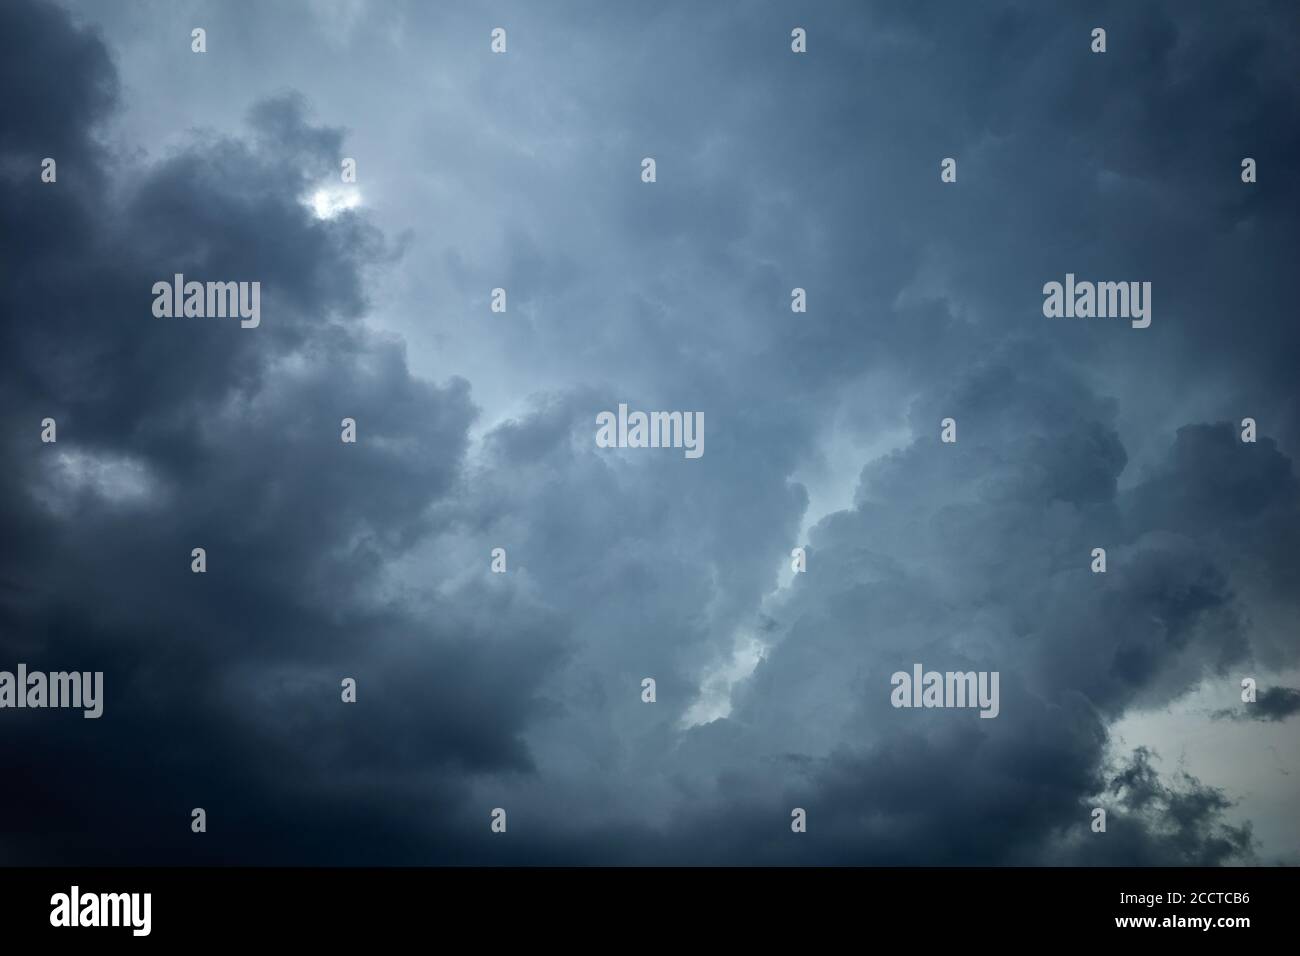 The Formation Of Rain Clouds In The Lead Sky Overcast Sky Conditions Occur When Clouds Cover All Or Most Of The Sky Stock Photo Alamy